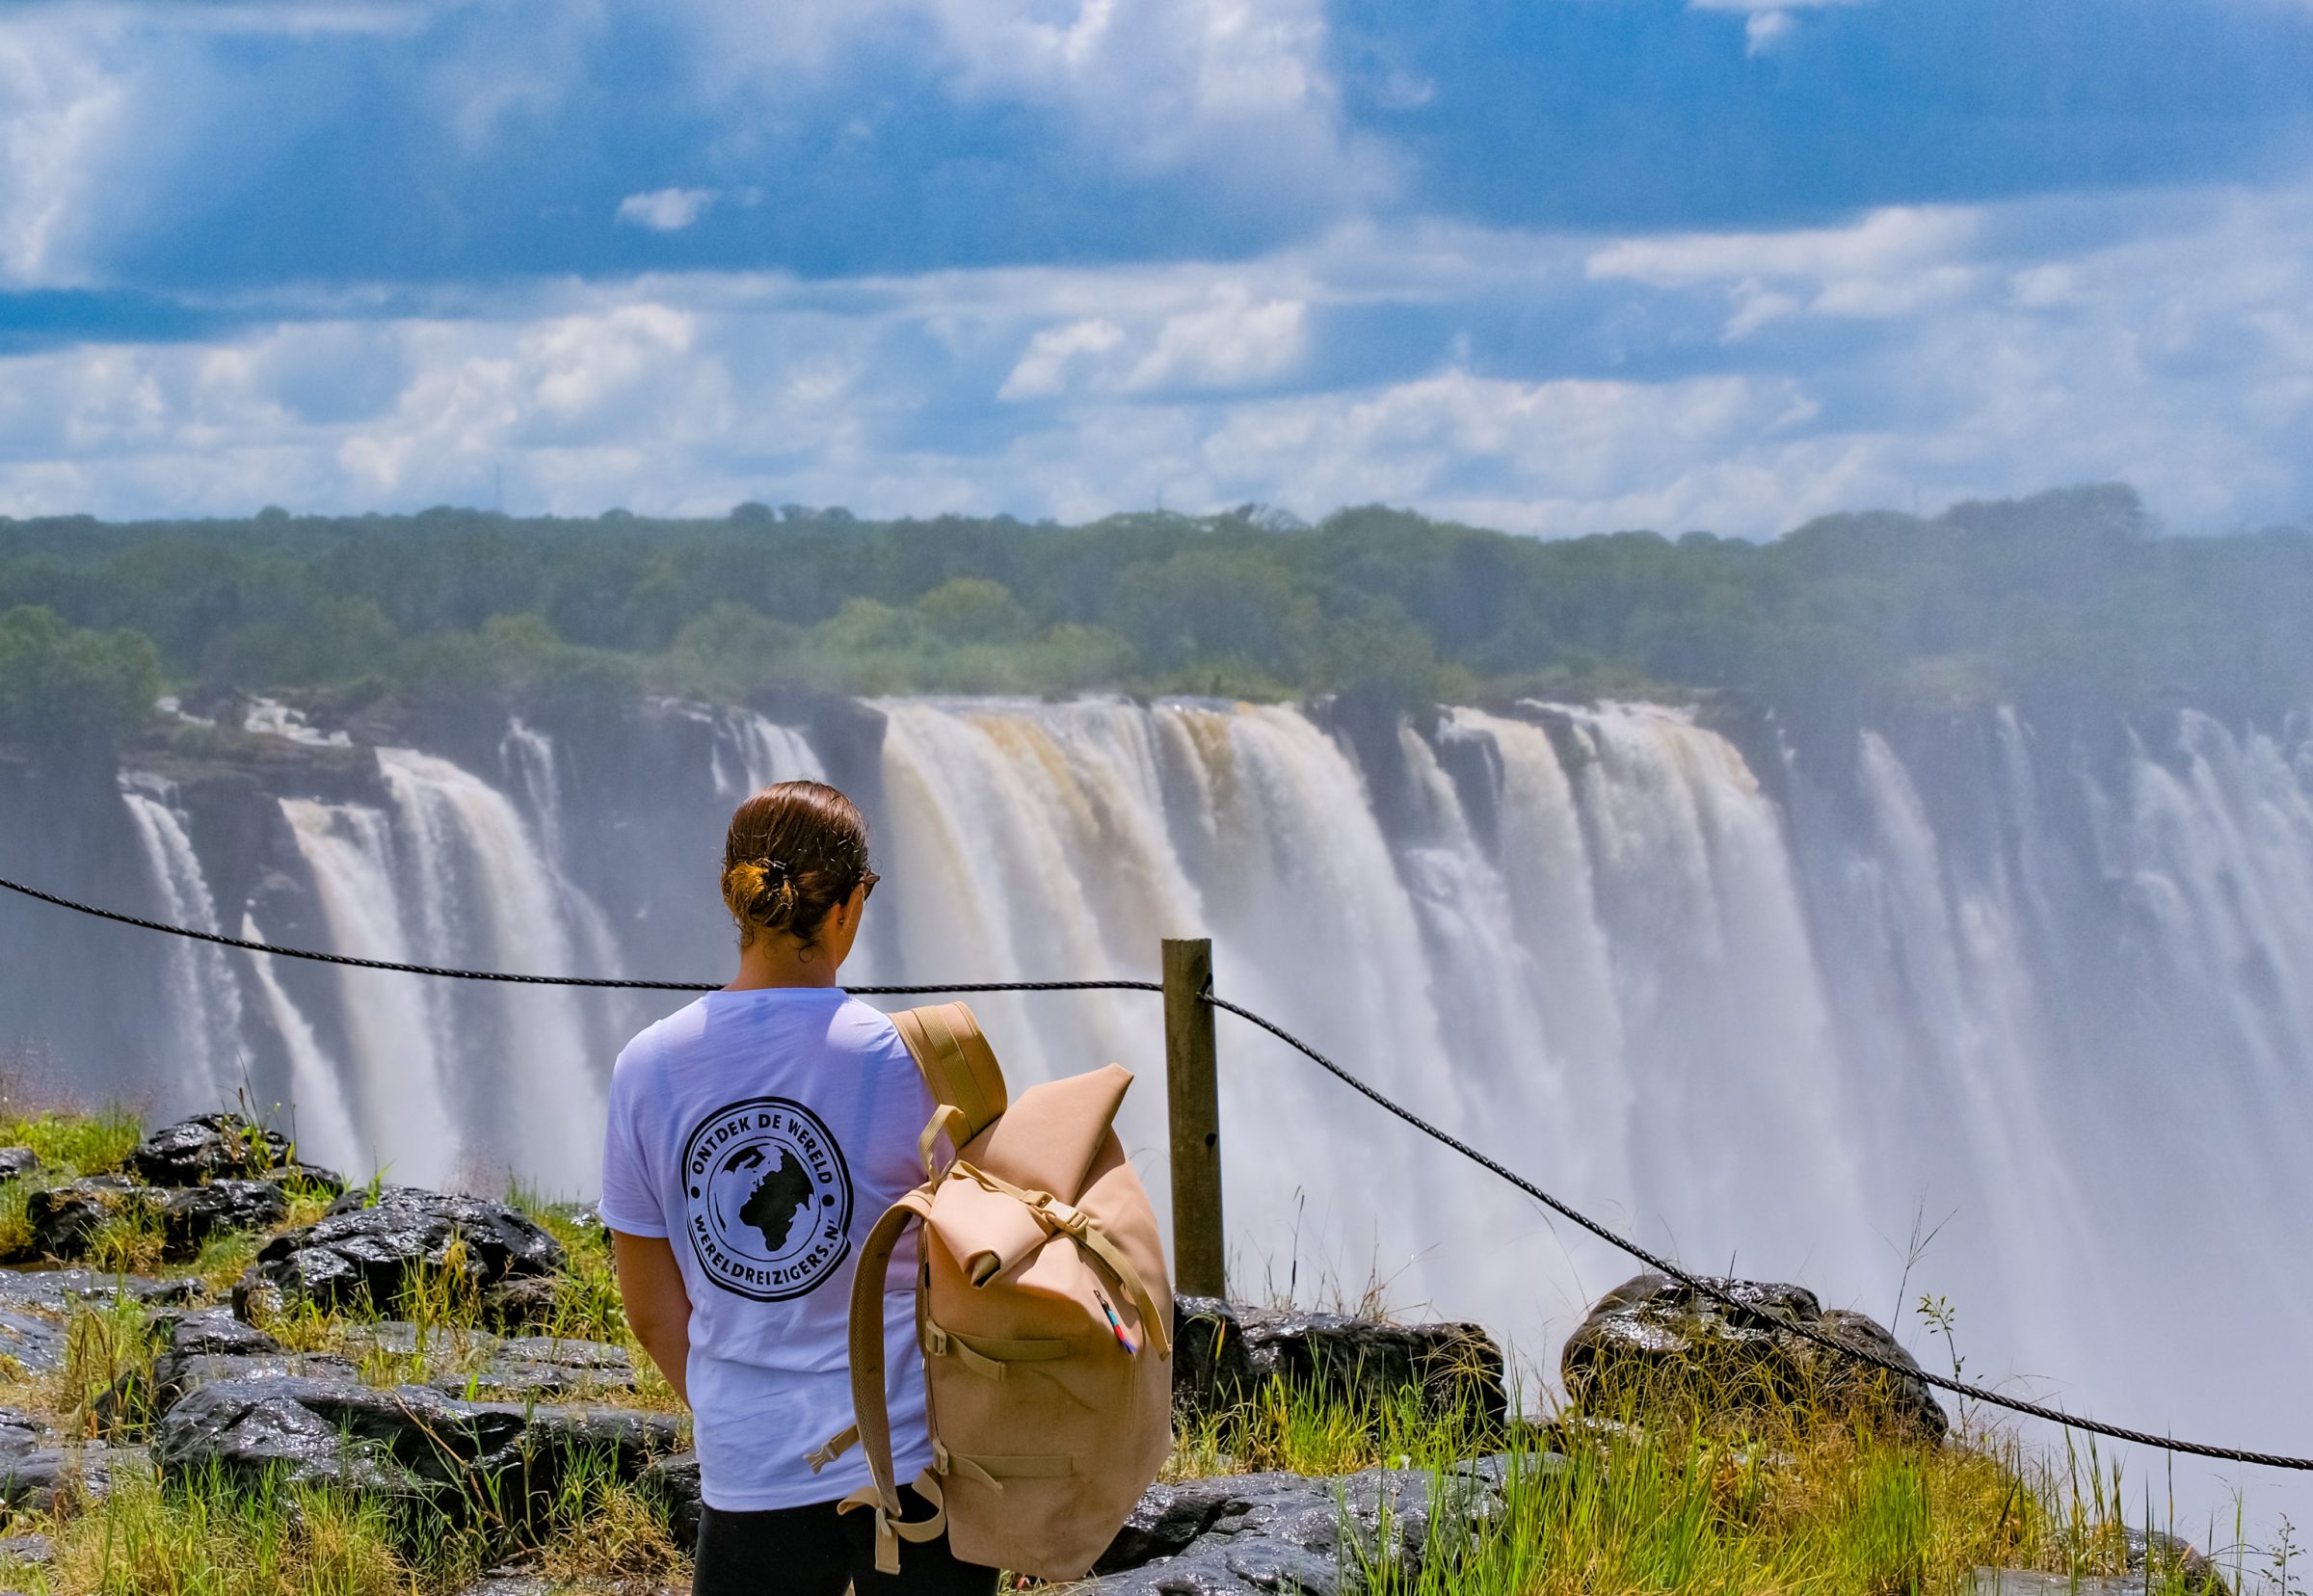 Malou at the Victoria Falls in her Wereldreizigers.nl T-shirt!